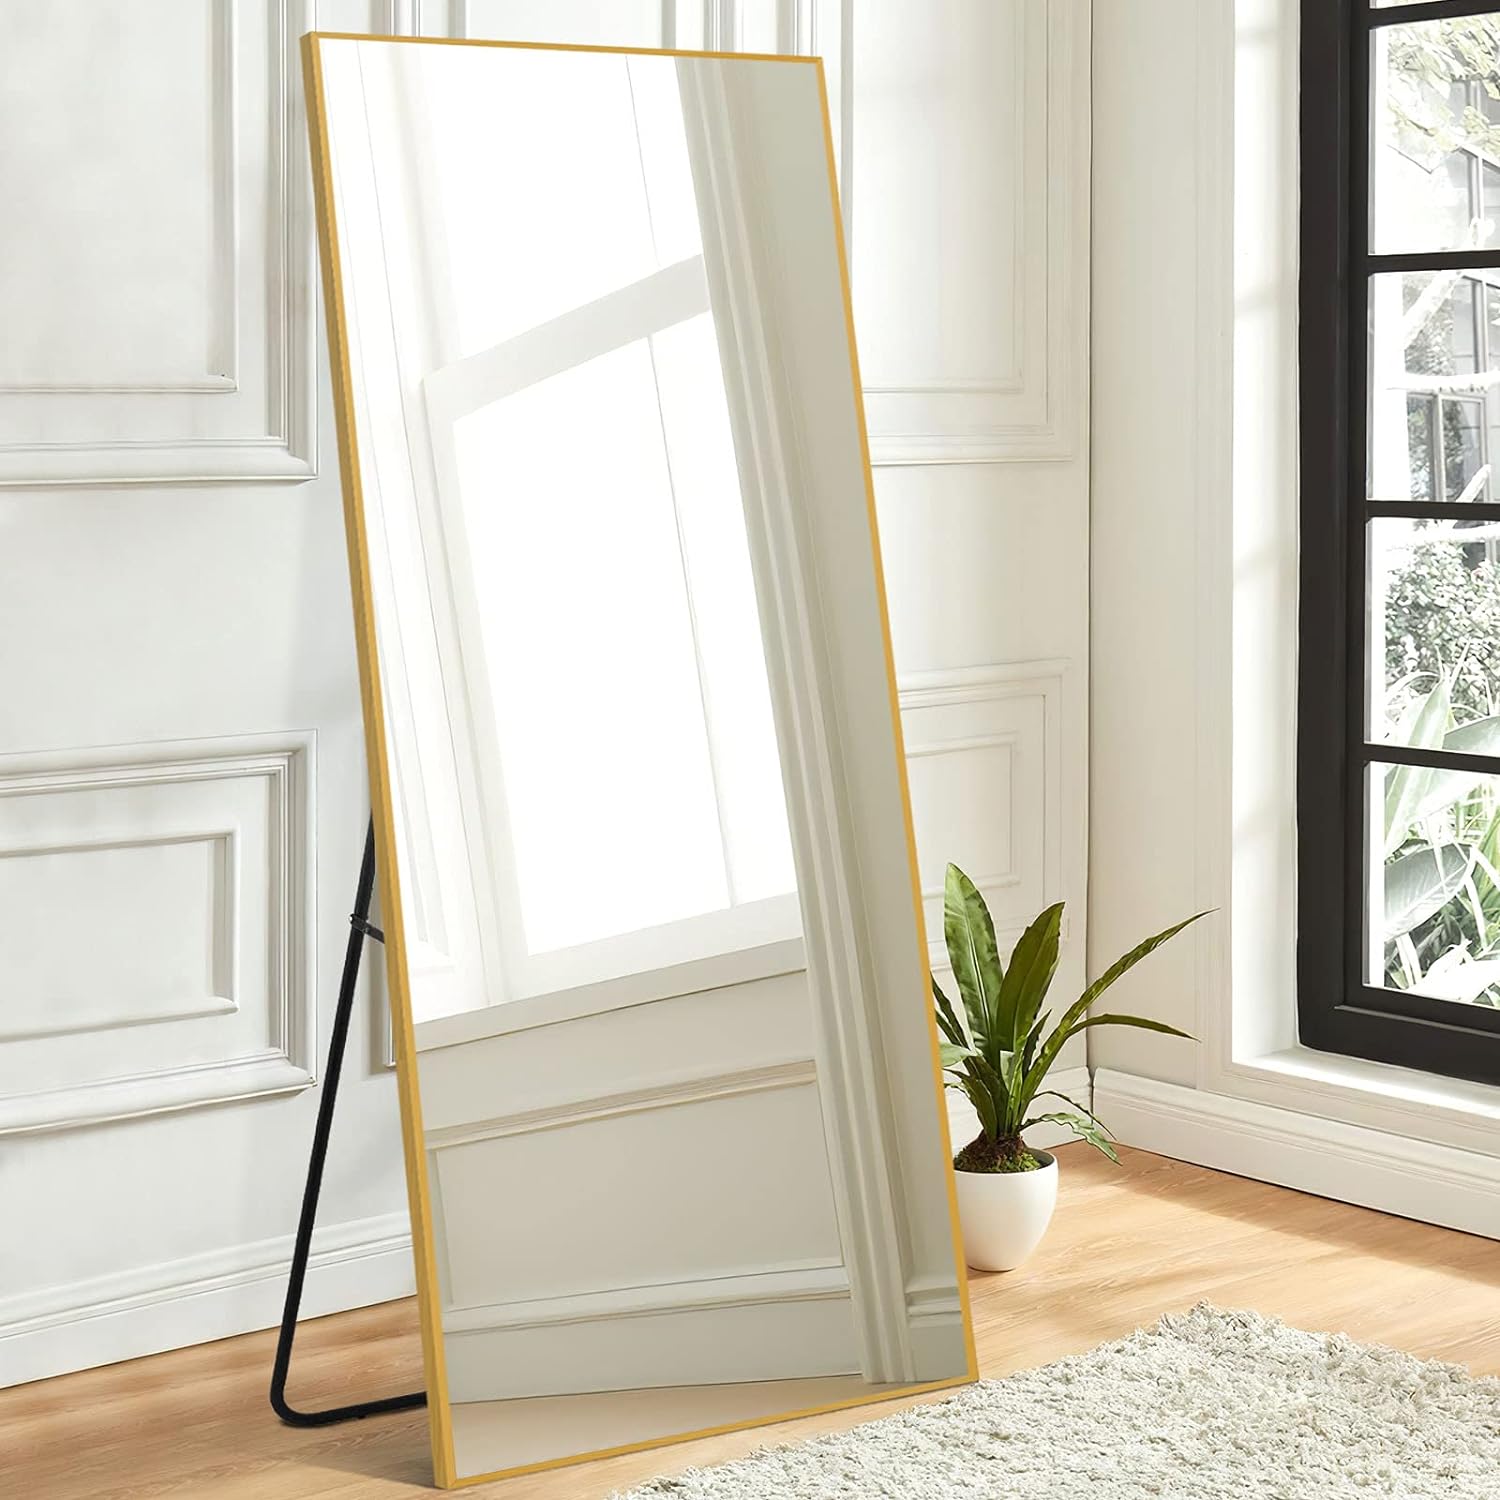 Great Choice Products 63"X20" Mirror Full Length Wall Mirror Floor & Full Length Mirrors For Wall Decor Living Room Wall-Mounted Mirrors Body Mirro…